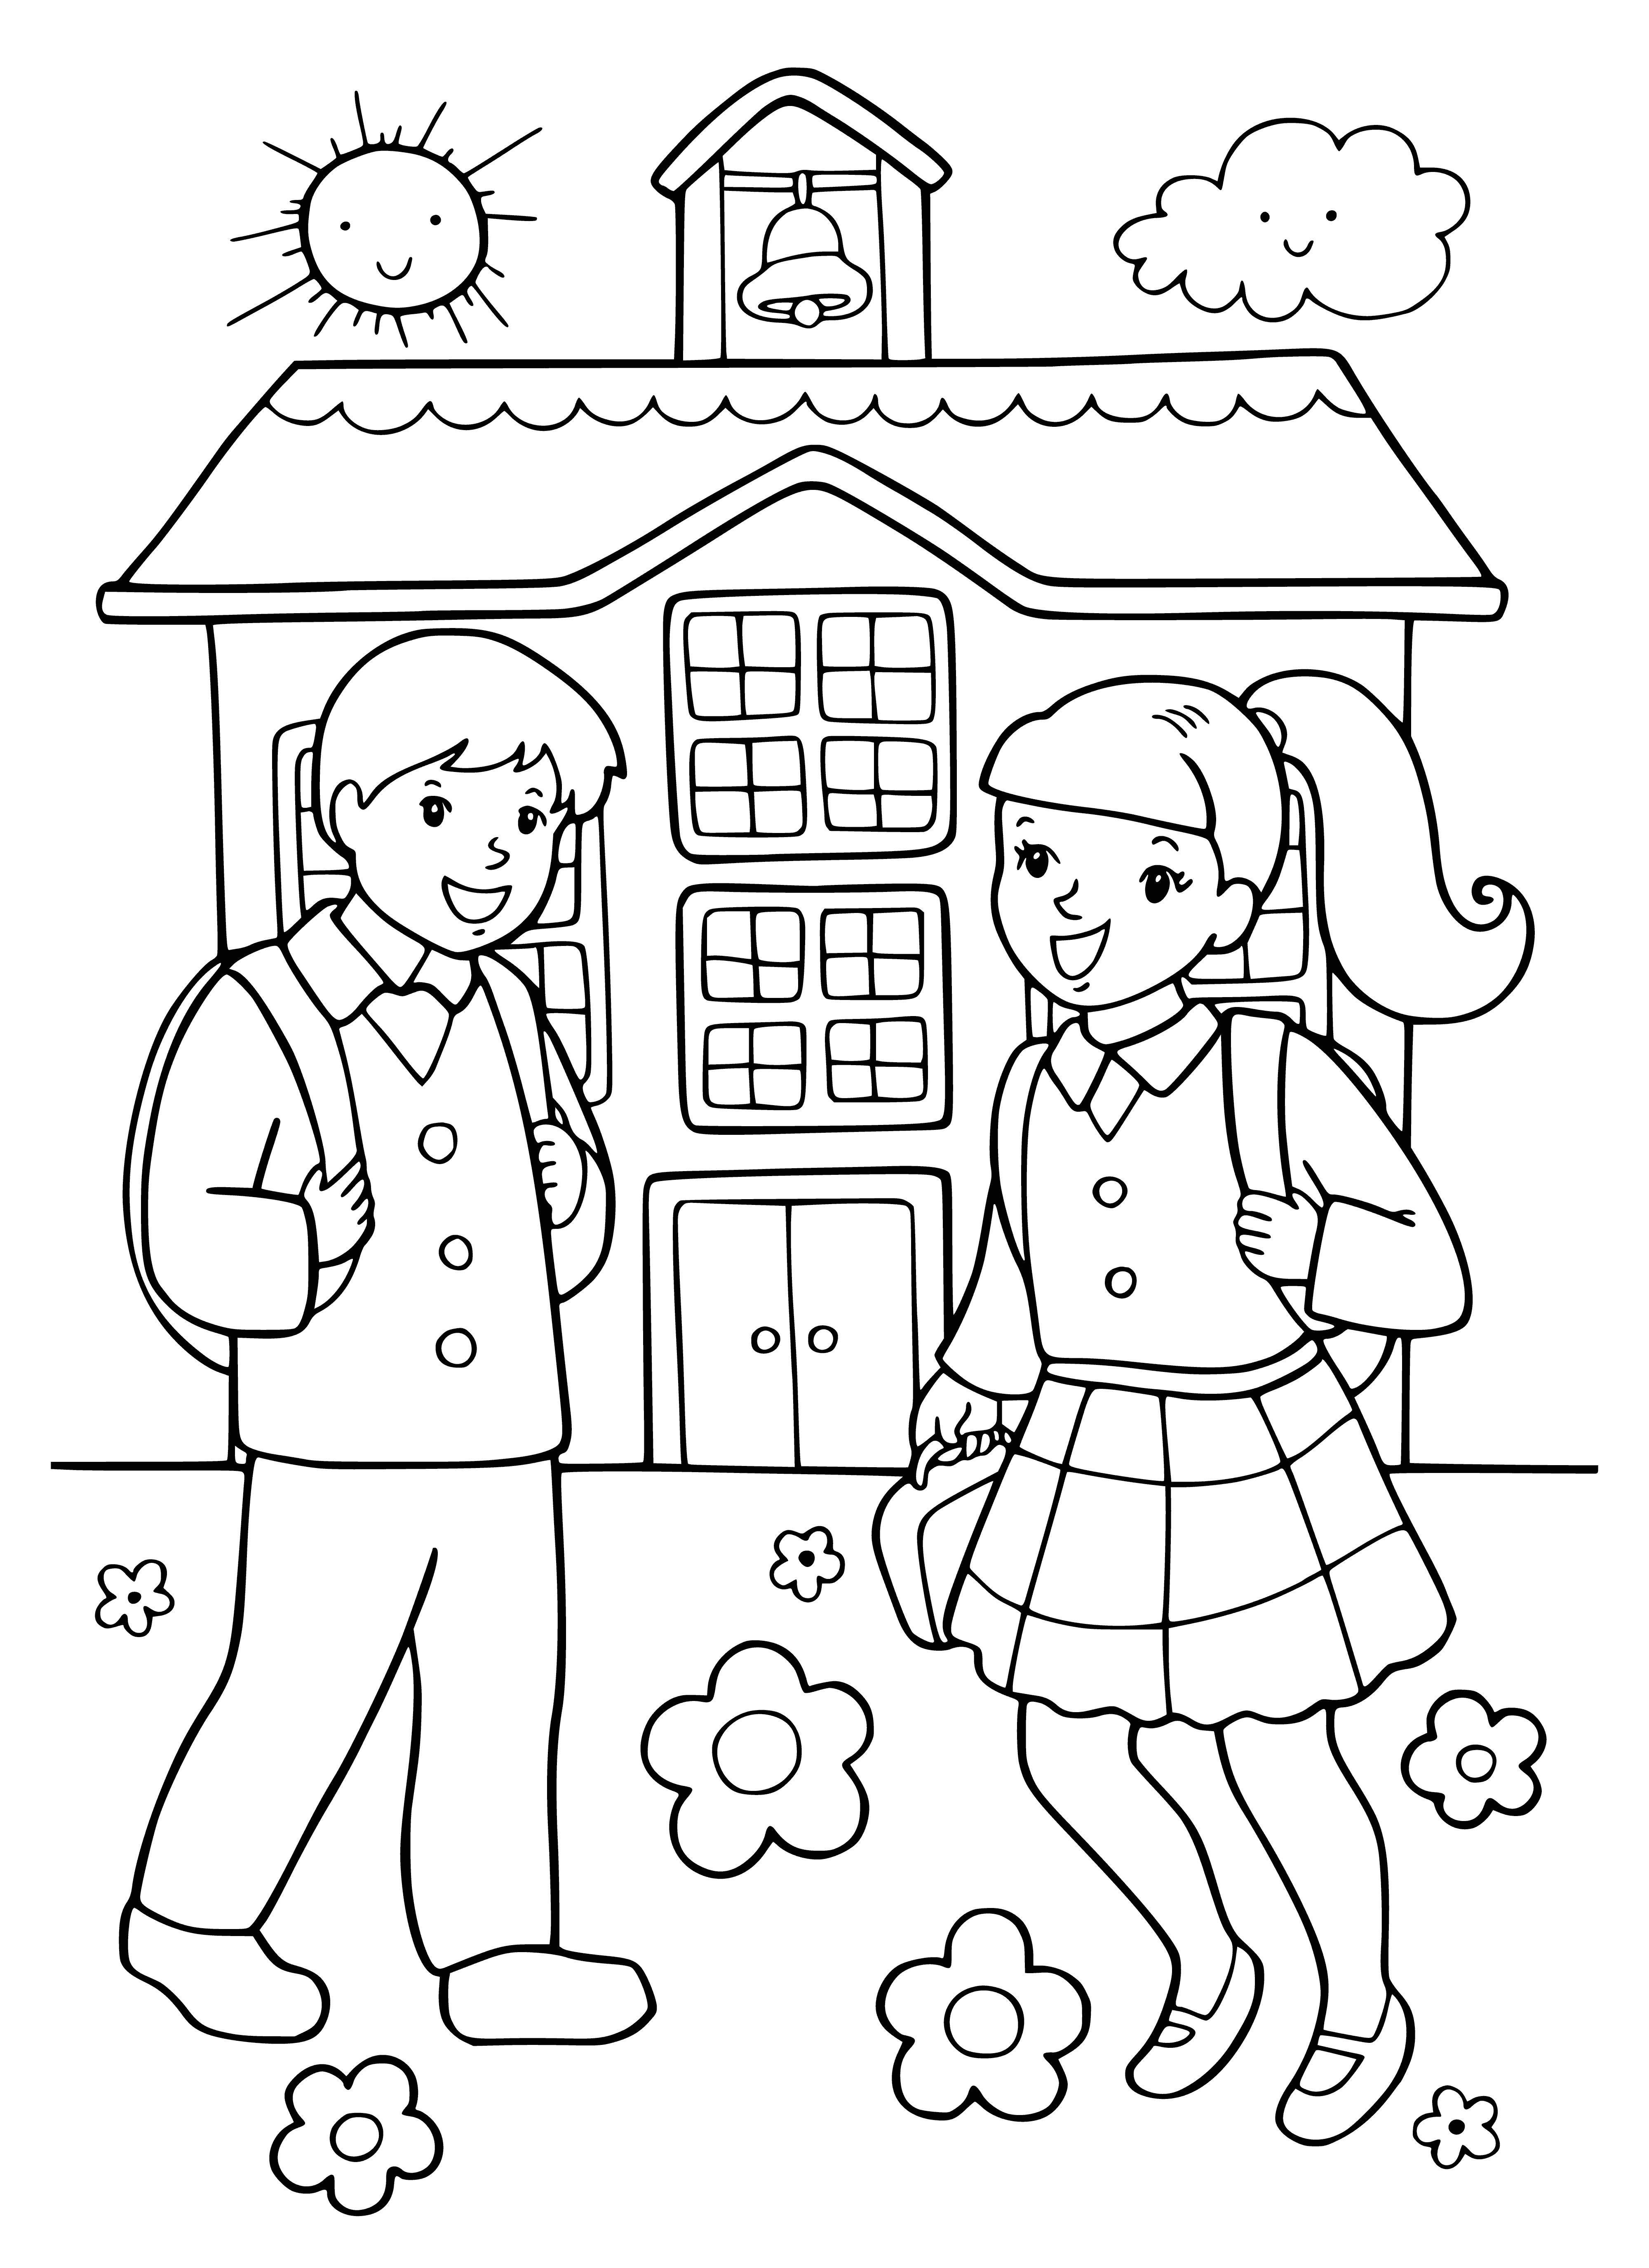 coloring page: The coloring page portrays children of various ages starting an exciting school day, with various reactions to the anticipation.